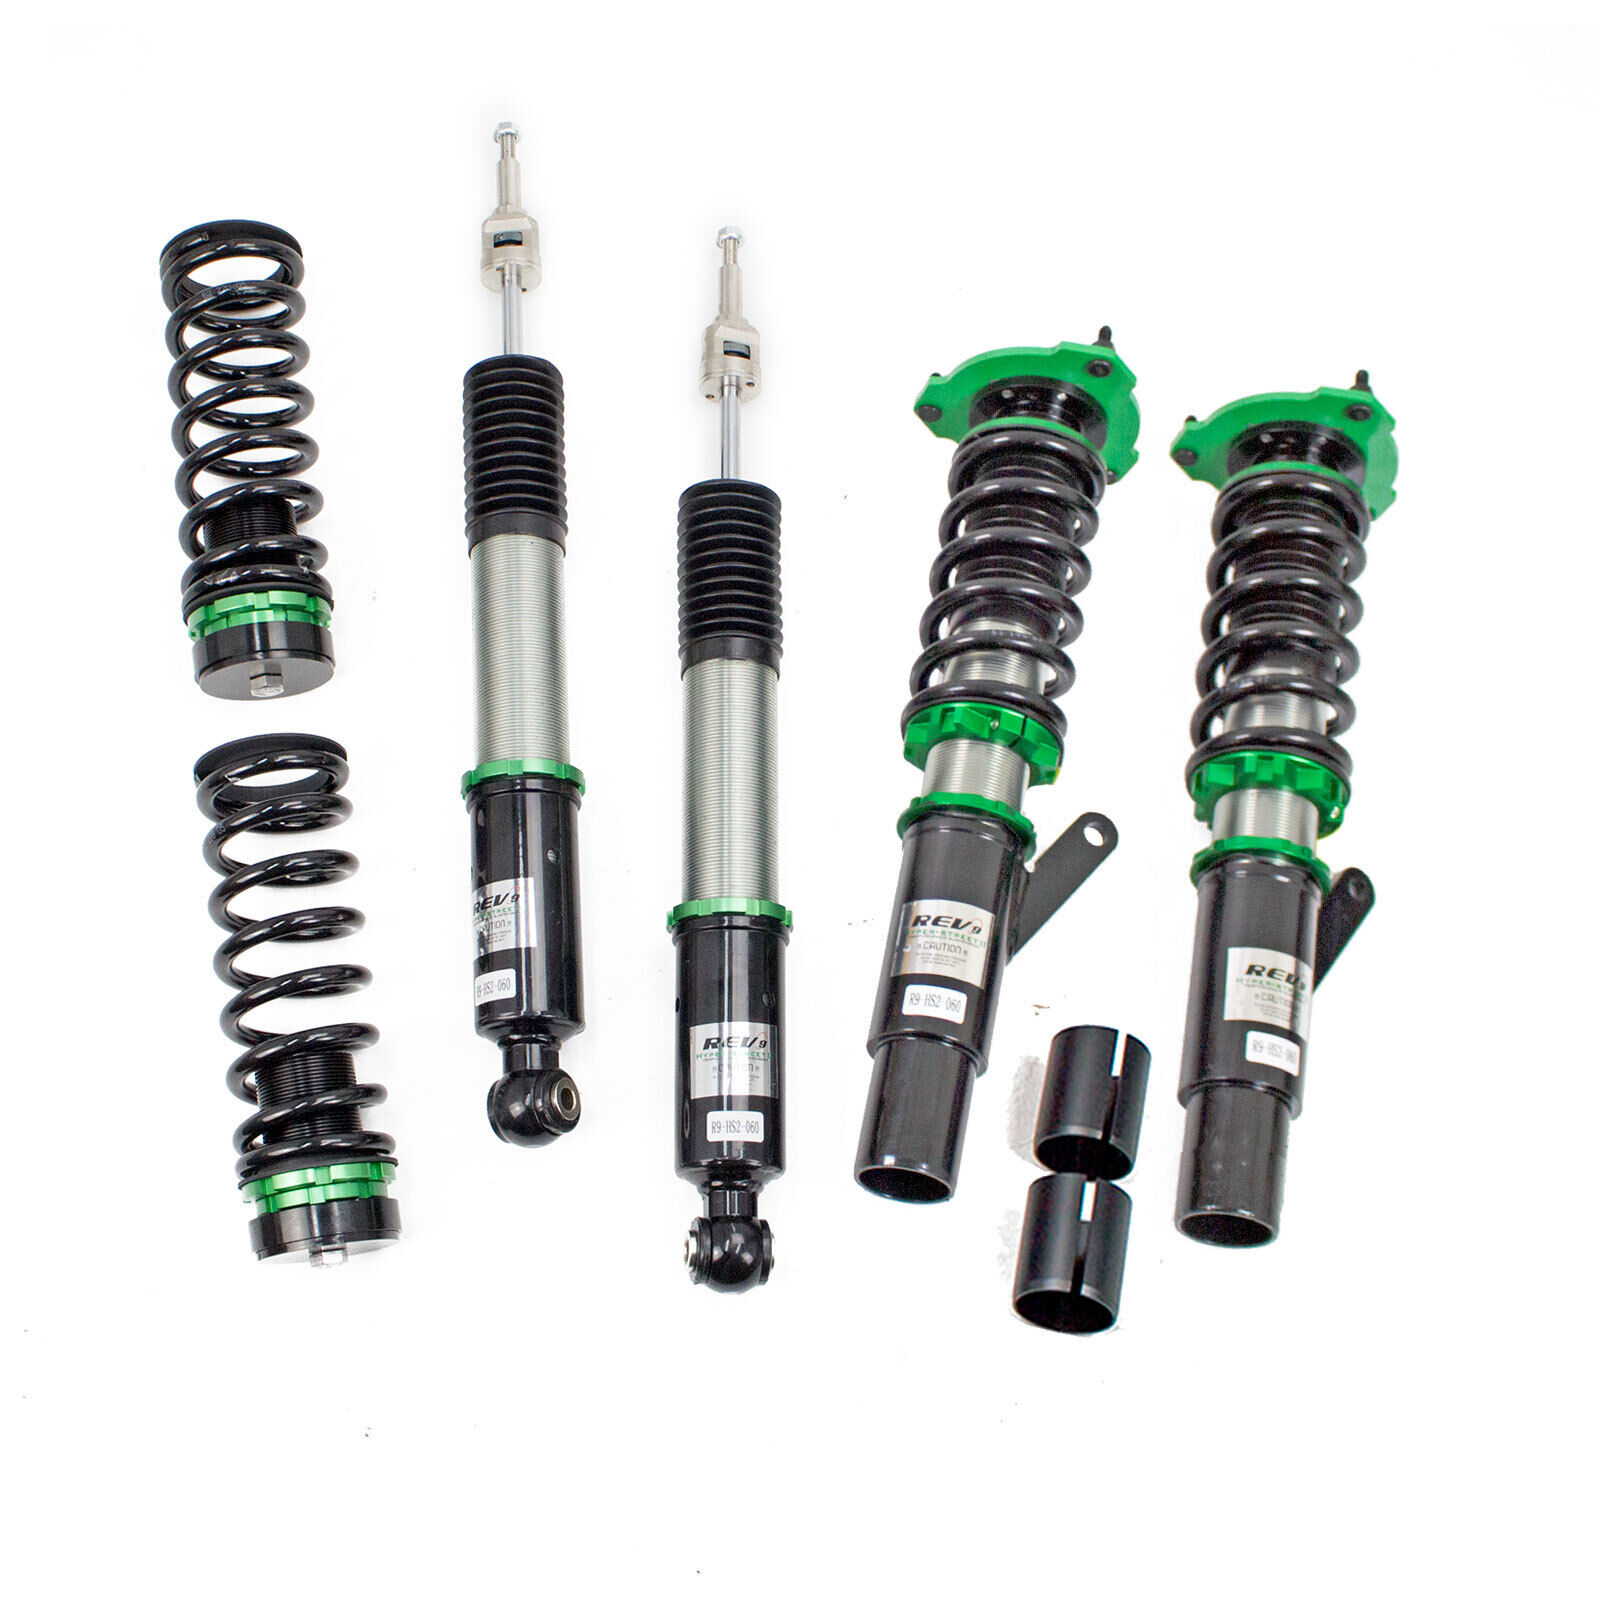 Coilovers For GOLF R/GTI 15-20 MK7 Suspension Kit Adjustable Damping Height